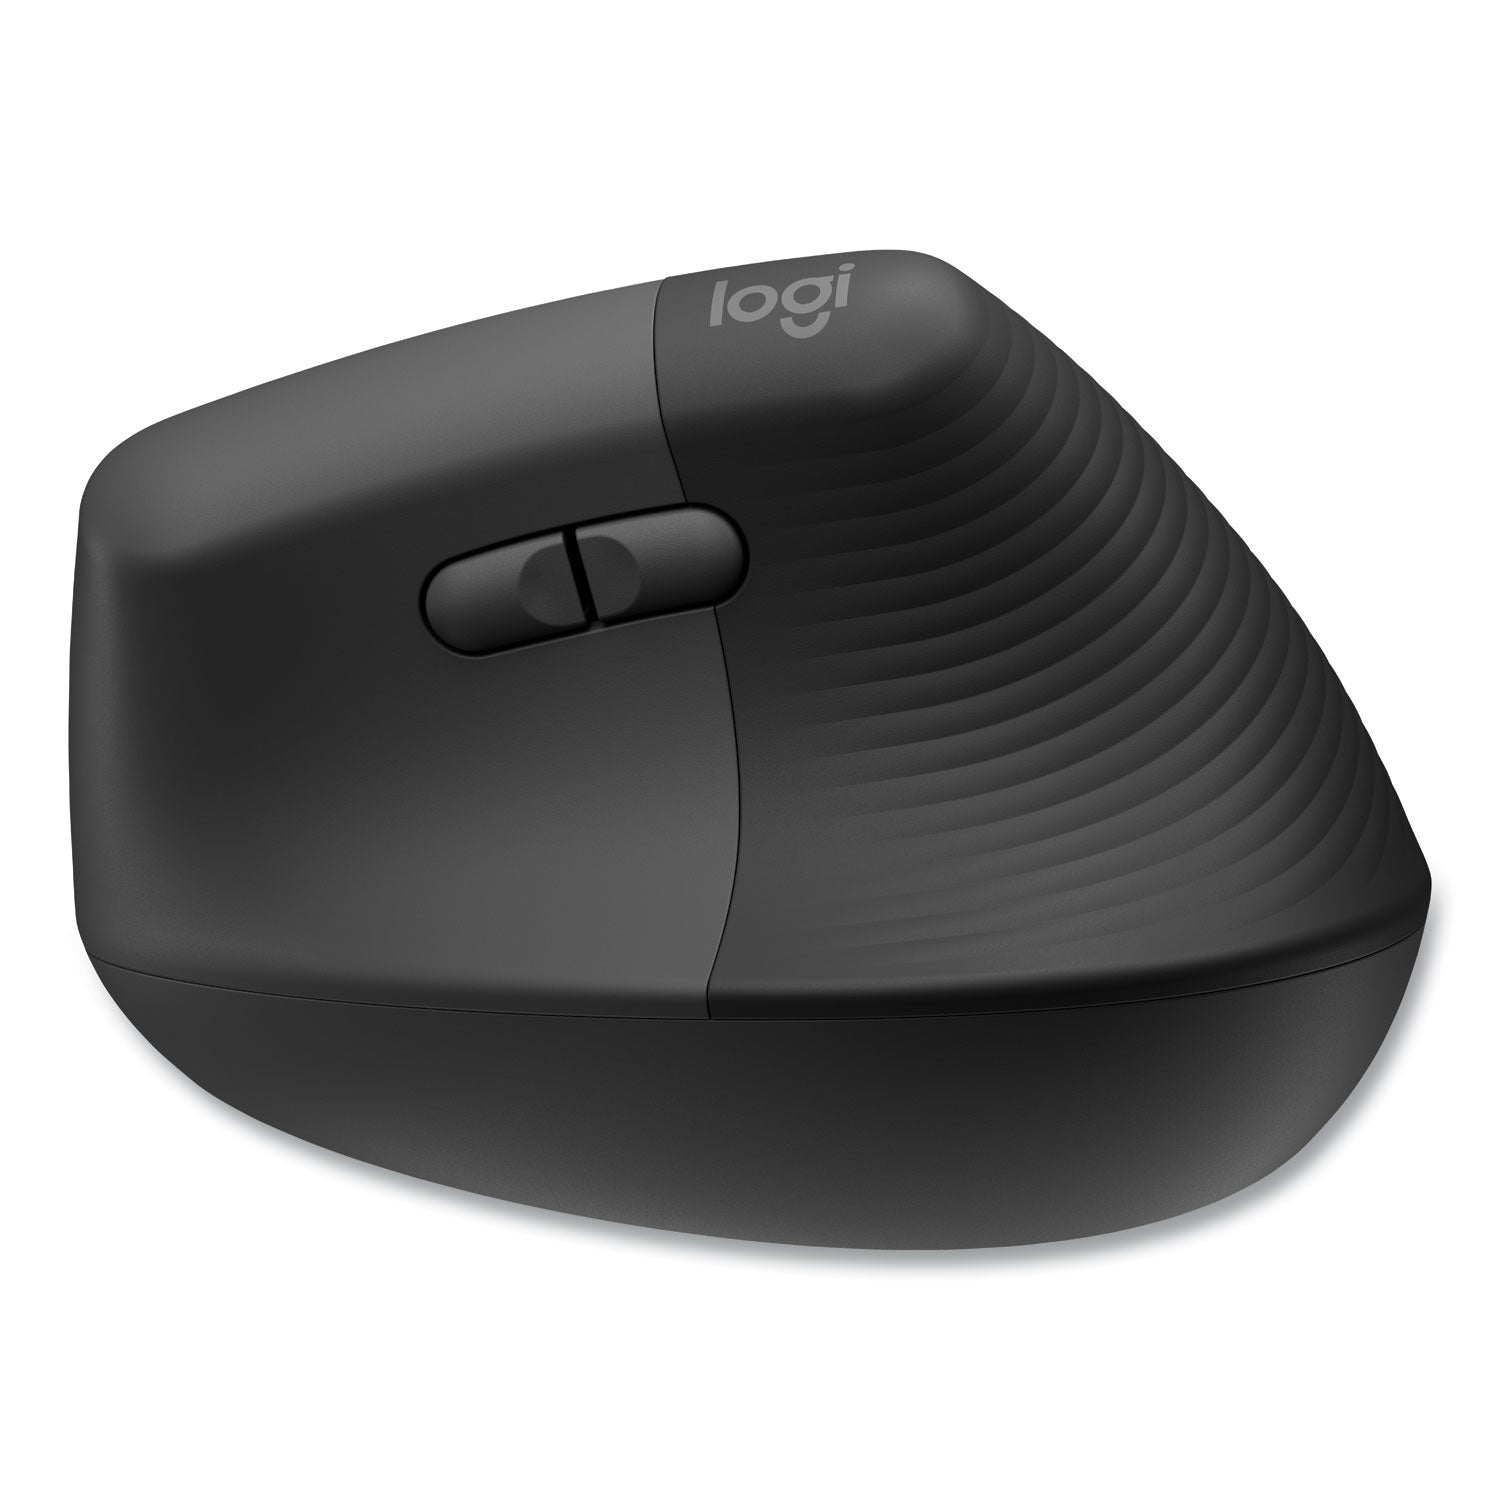 lift-for-business-vertical-ergonomic-mouse-24-ghz-frequency-32-ft-wireless-range-right-hand-use-graphite_log910006491 - 6